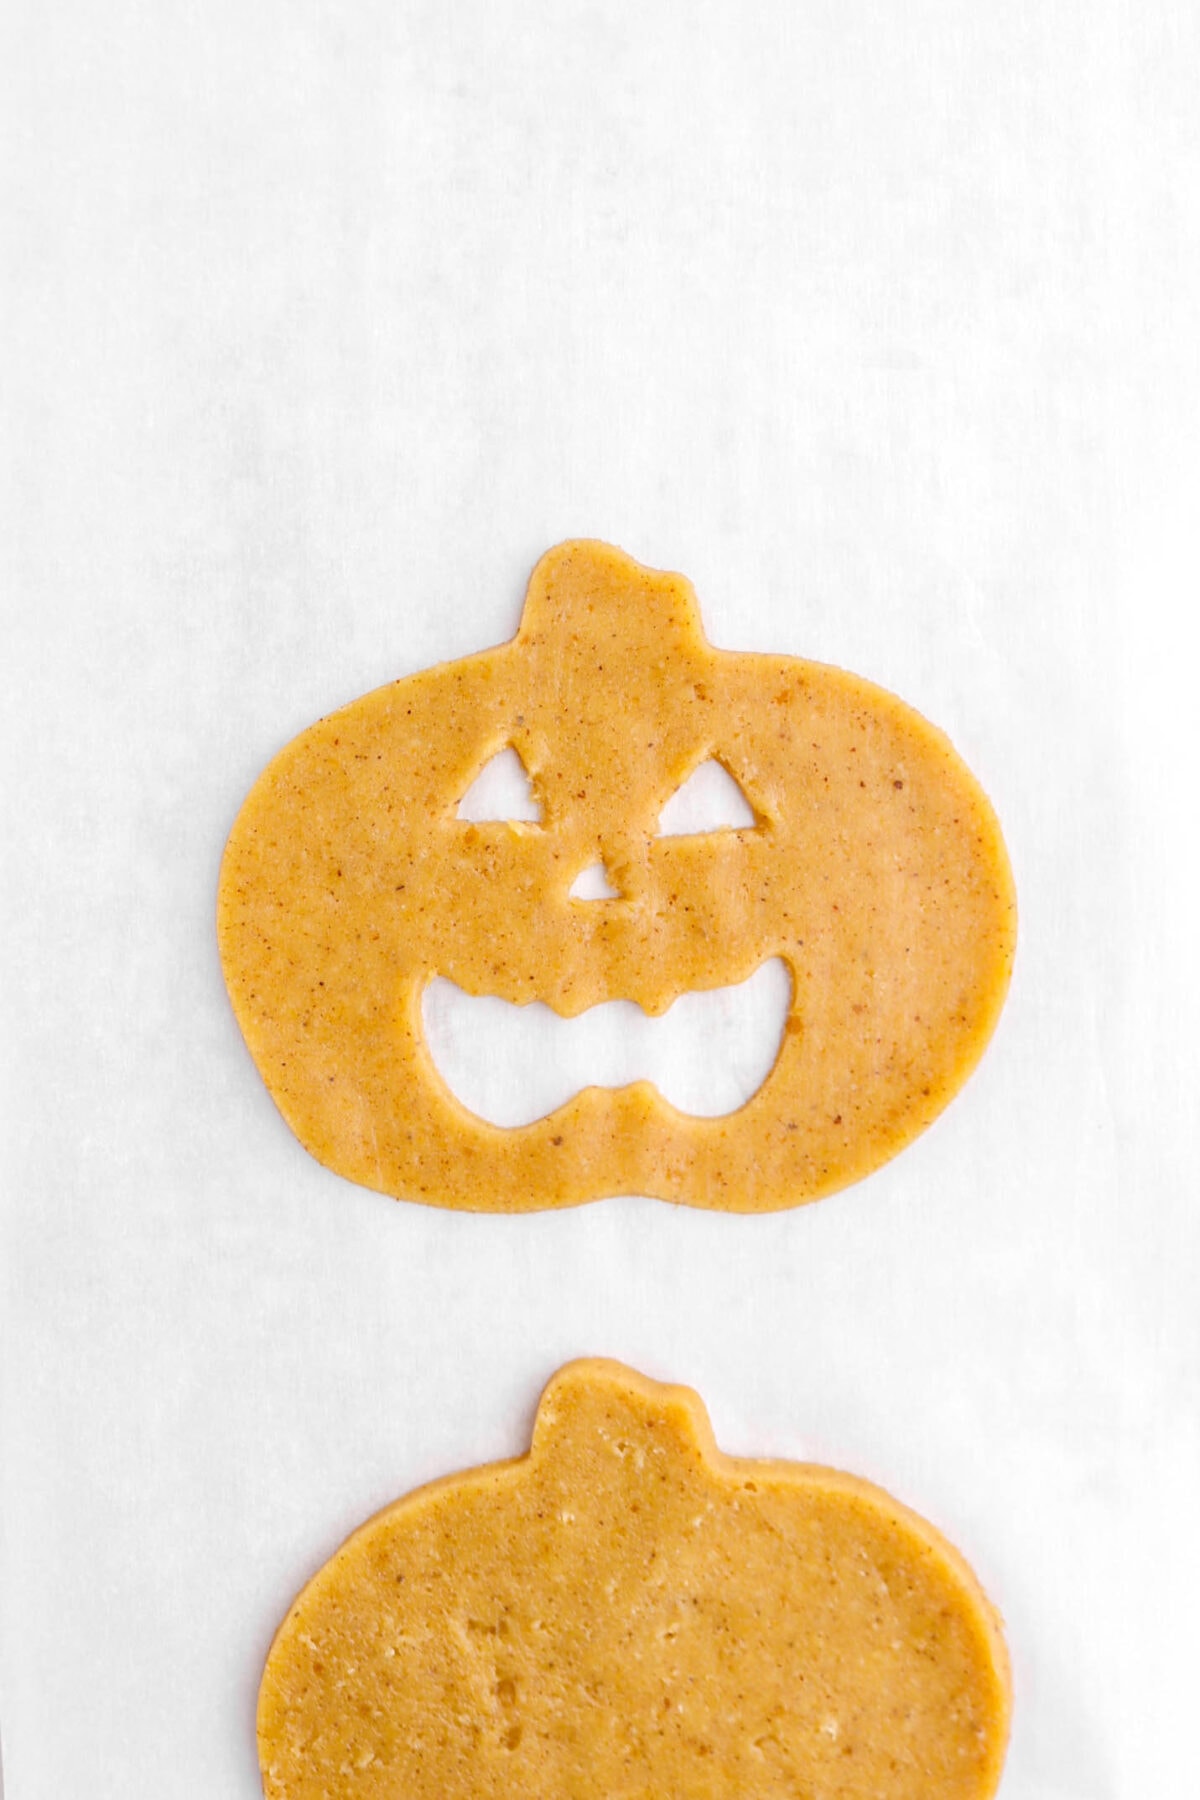 unbaked jack o'lantern cookie on parchment paper.